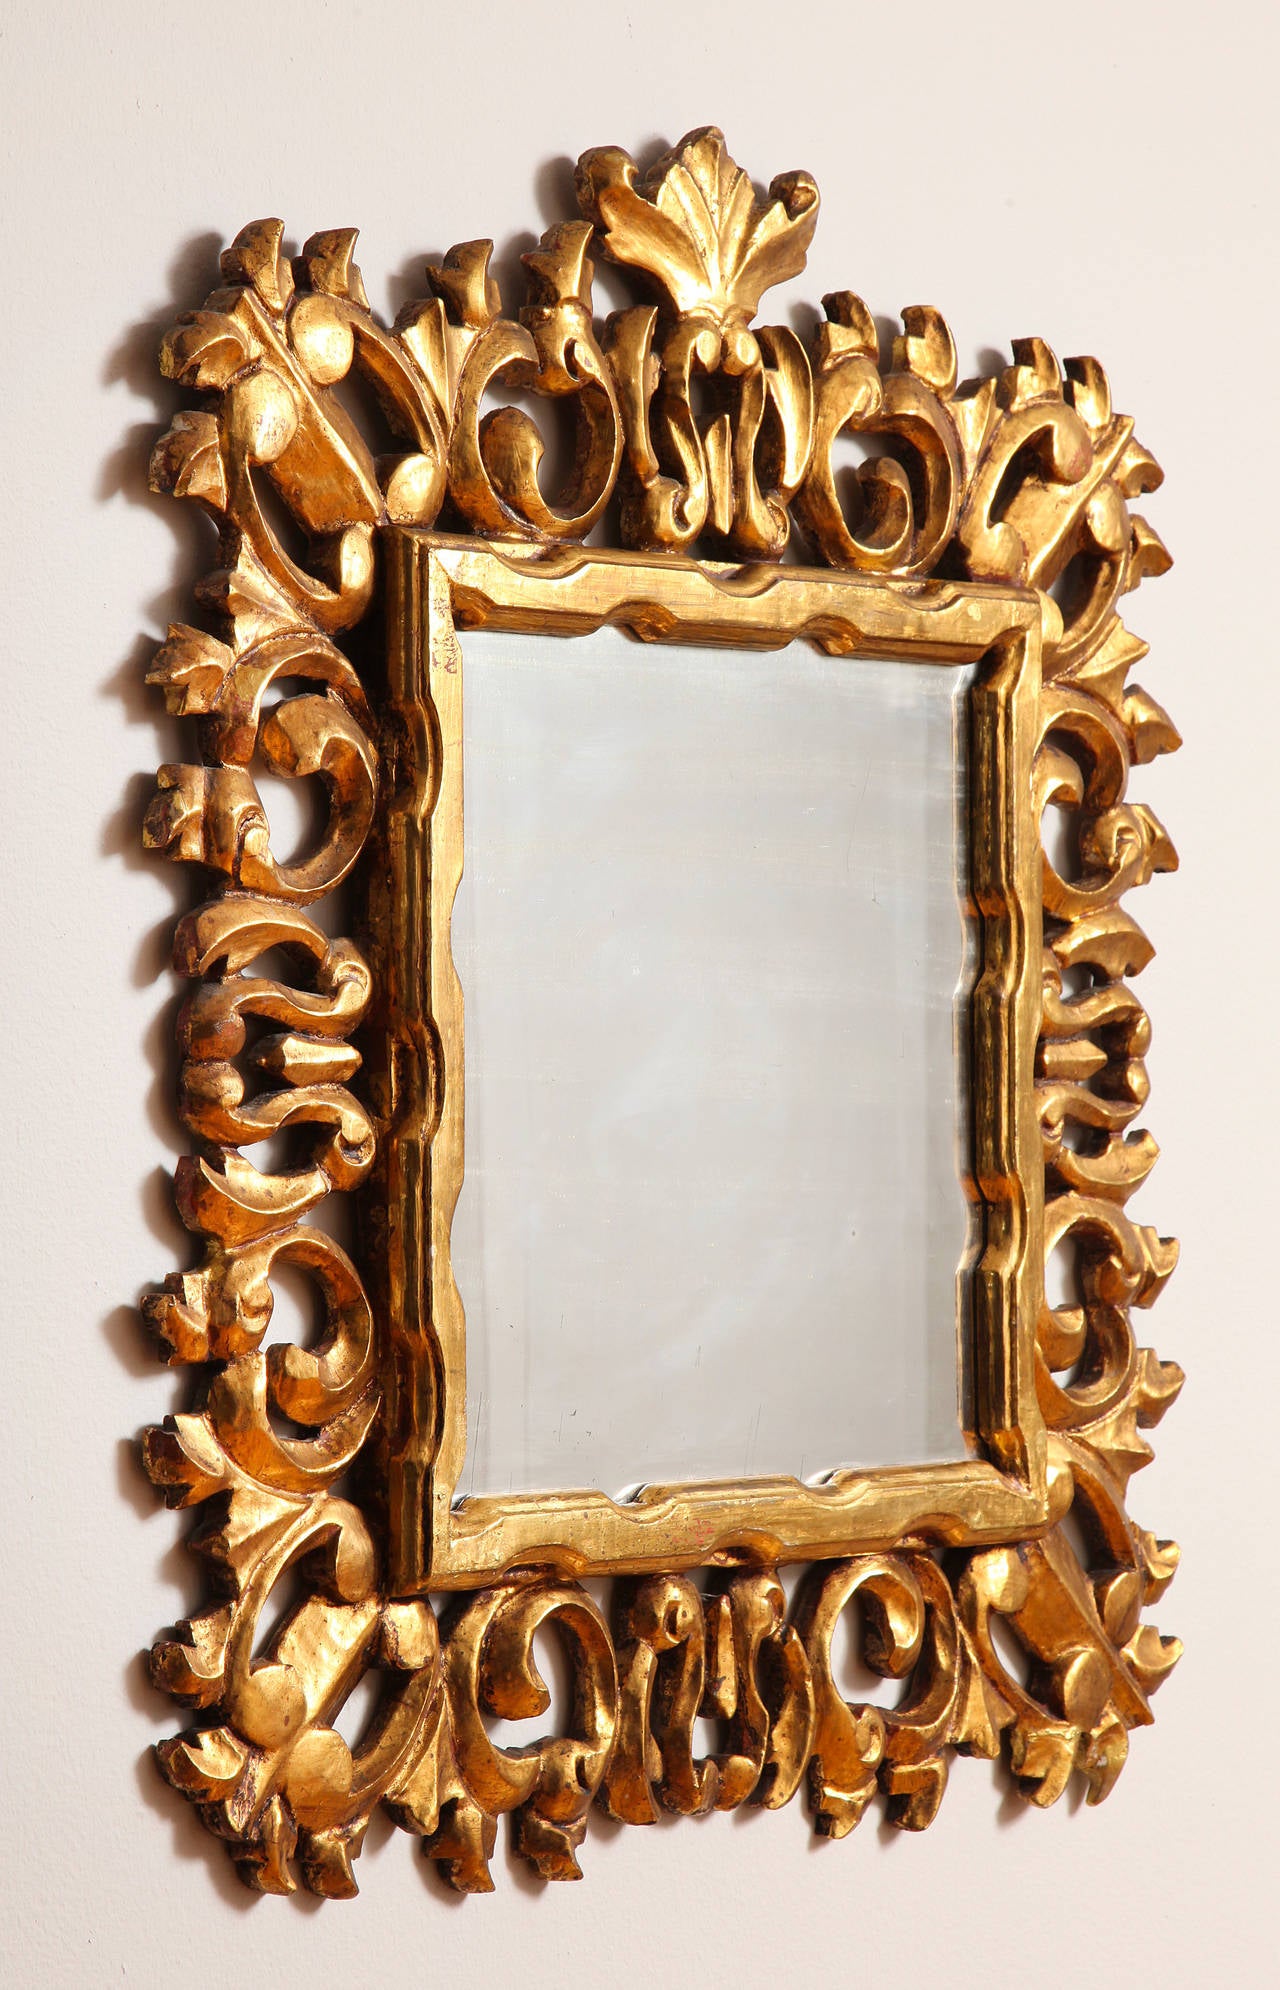 An exuberantly carved and gilded Italian Baroque style mirror frame with its original mirror glass.